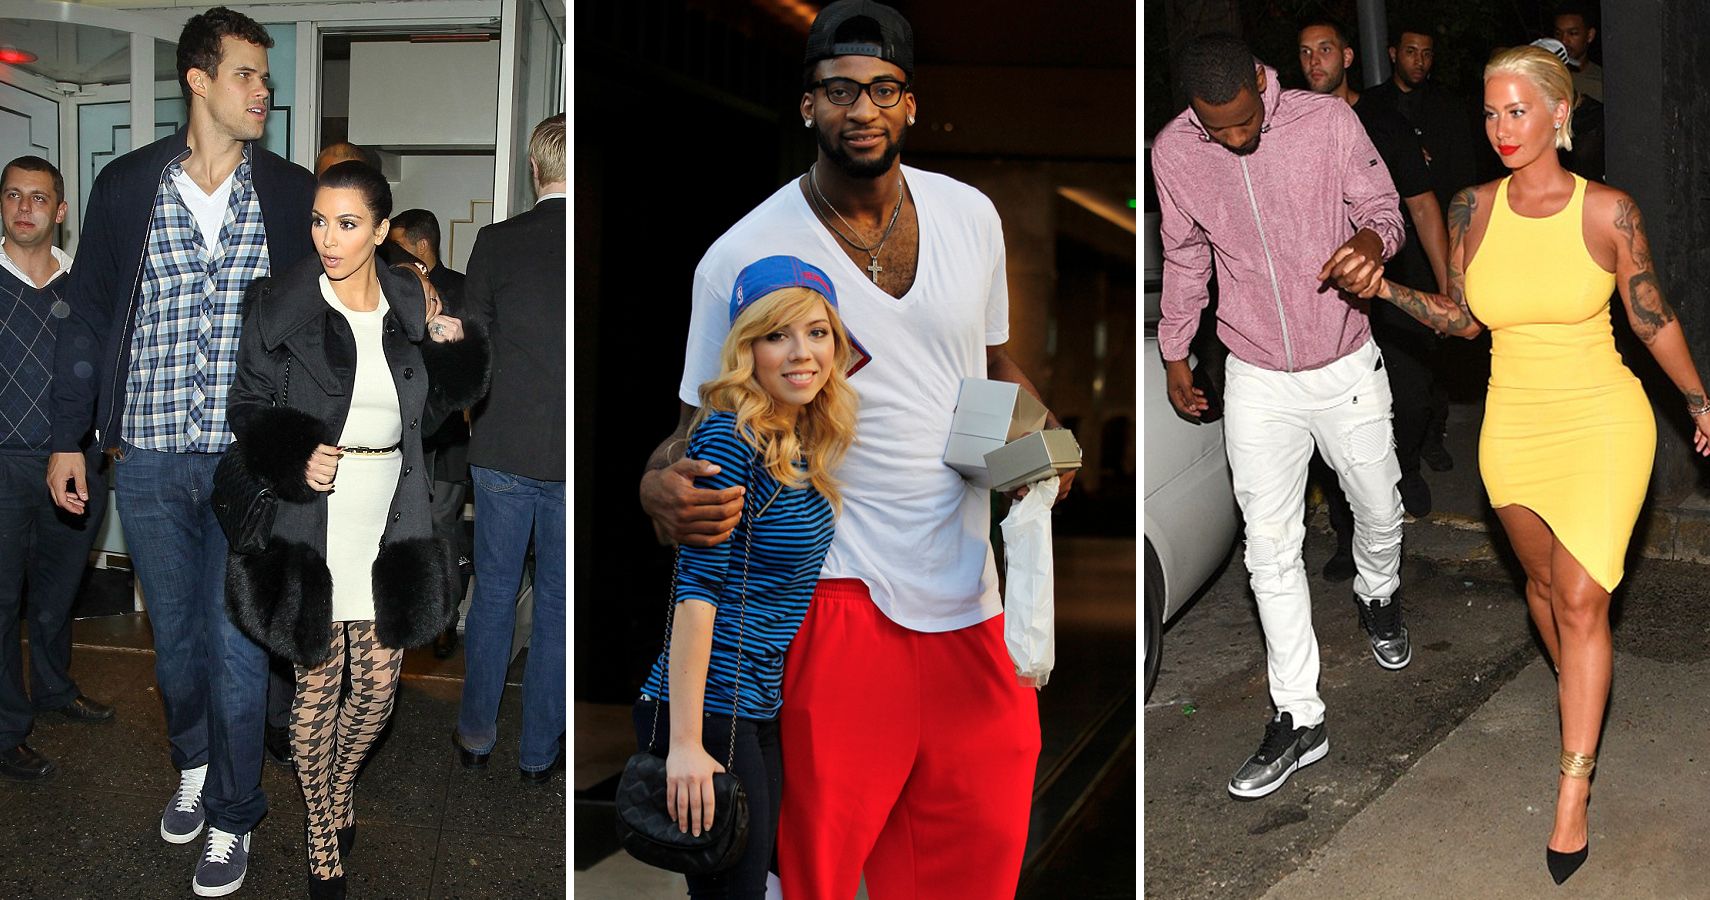 Women These Basketball Players Want You To Forget They Dated